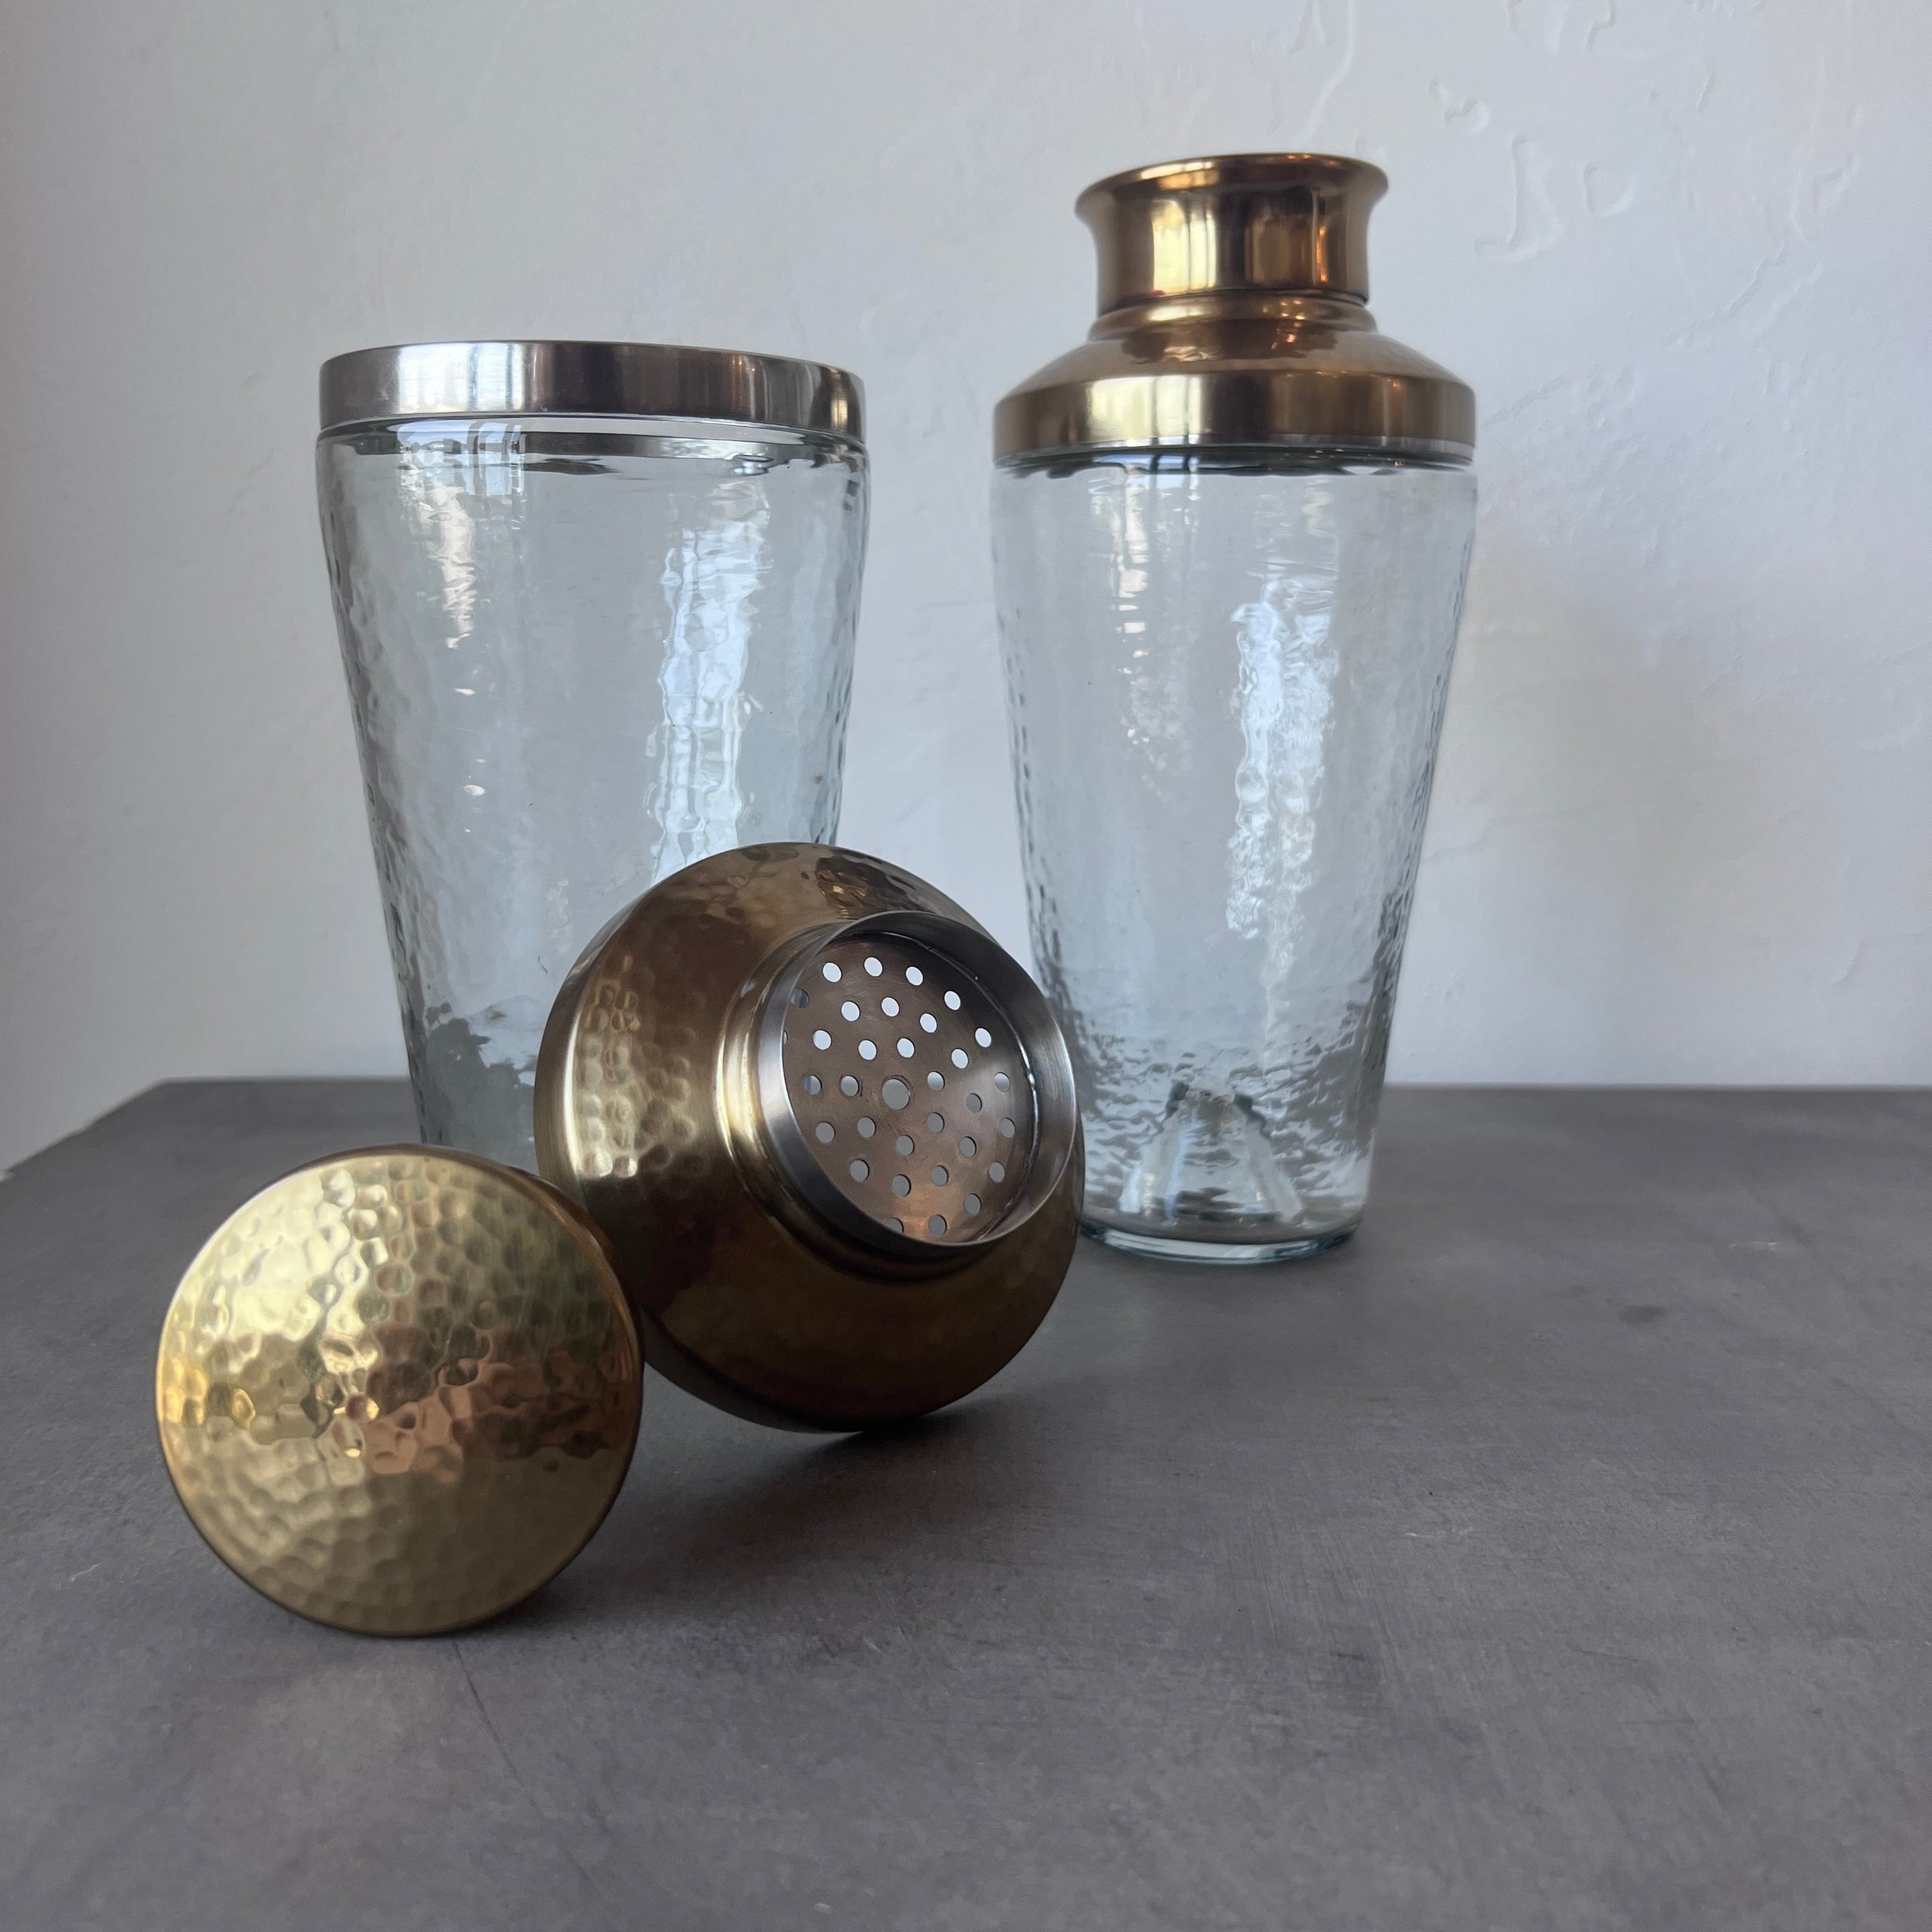 PEBBLED GLASS AND HAMMERED METAL COCKTAIL SHAKER